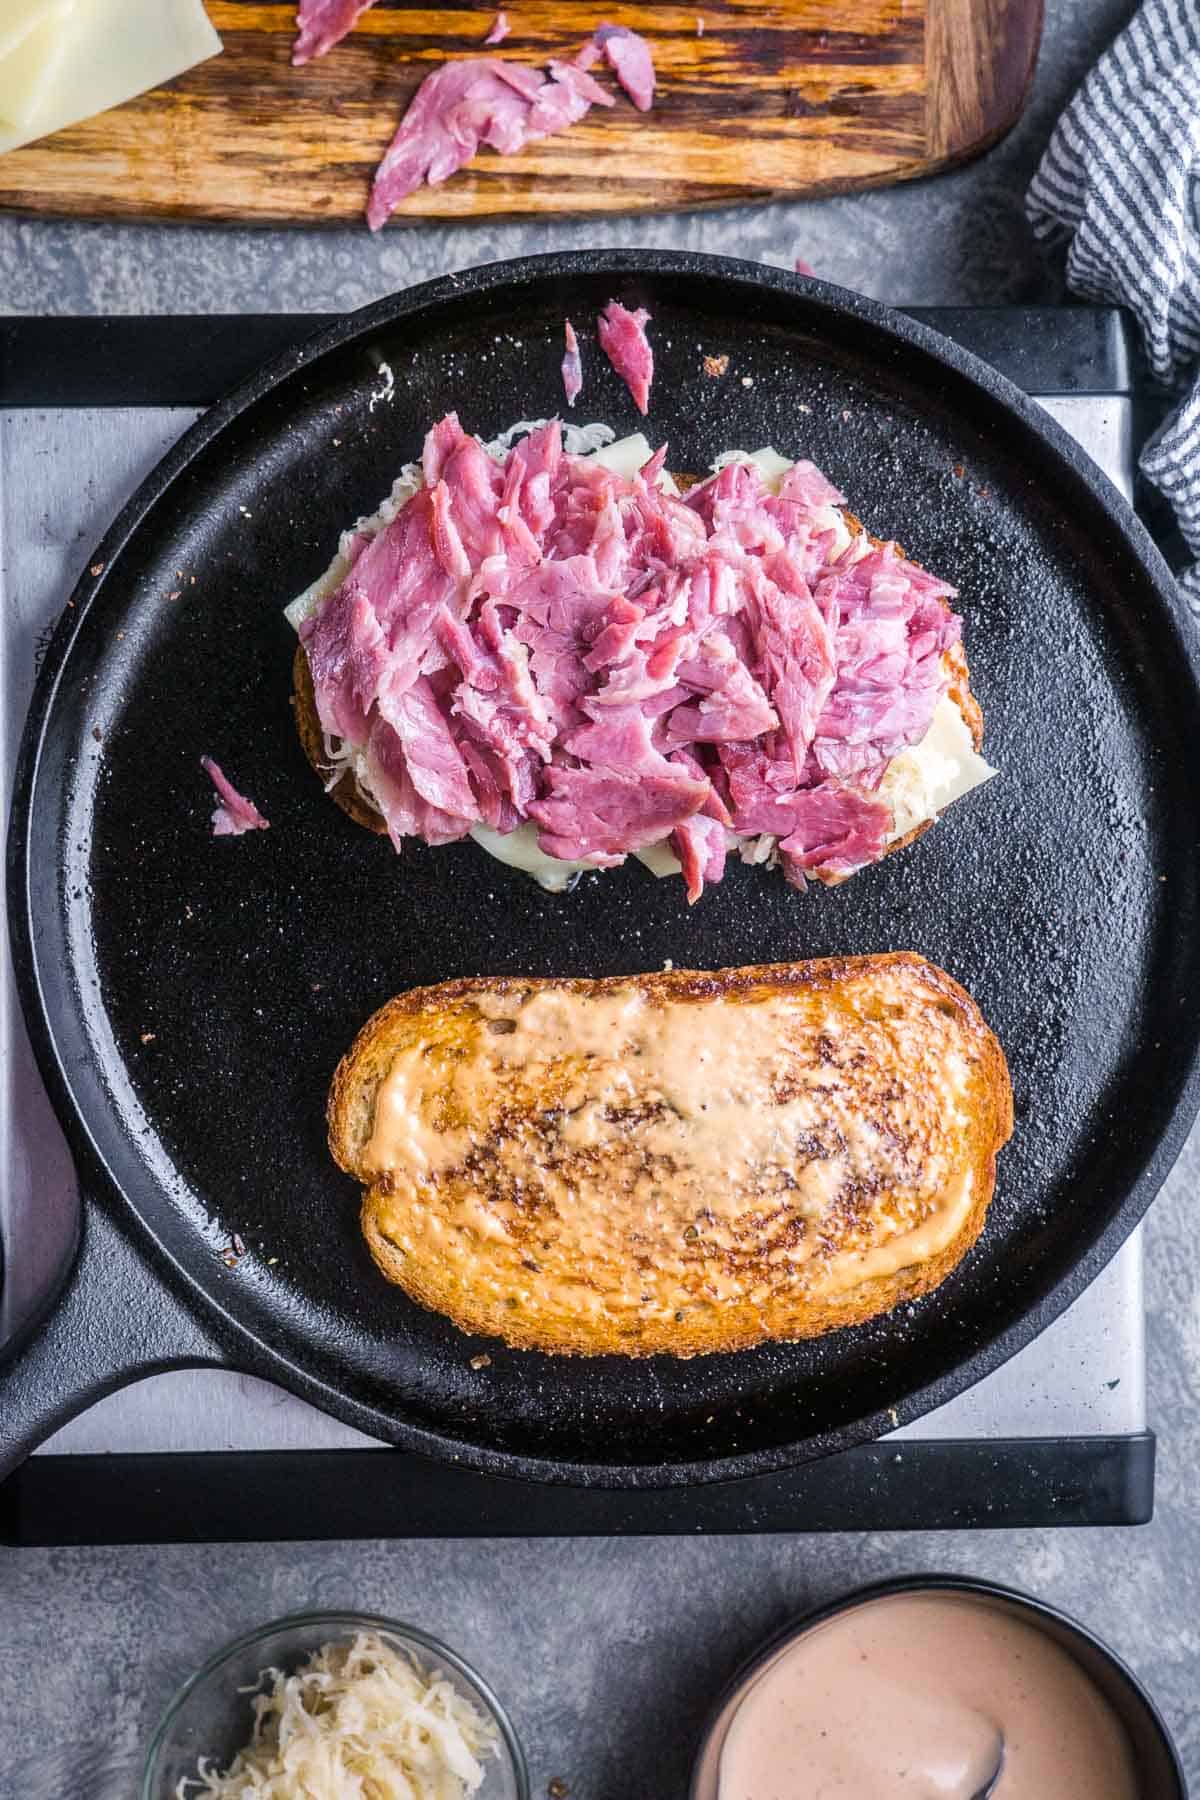 Two Reubens in a cast iron skillet, one opened to show sliced corned beef